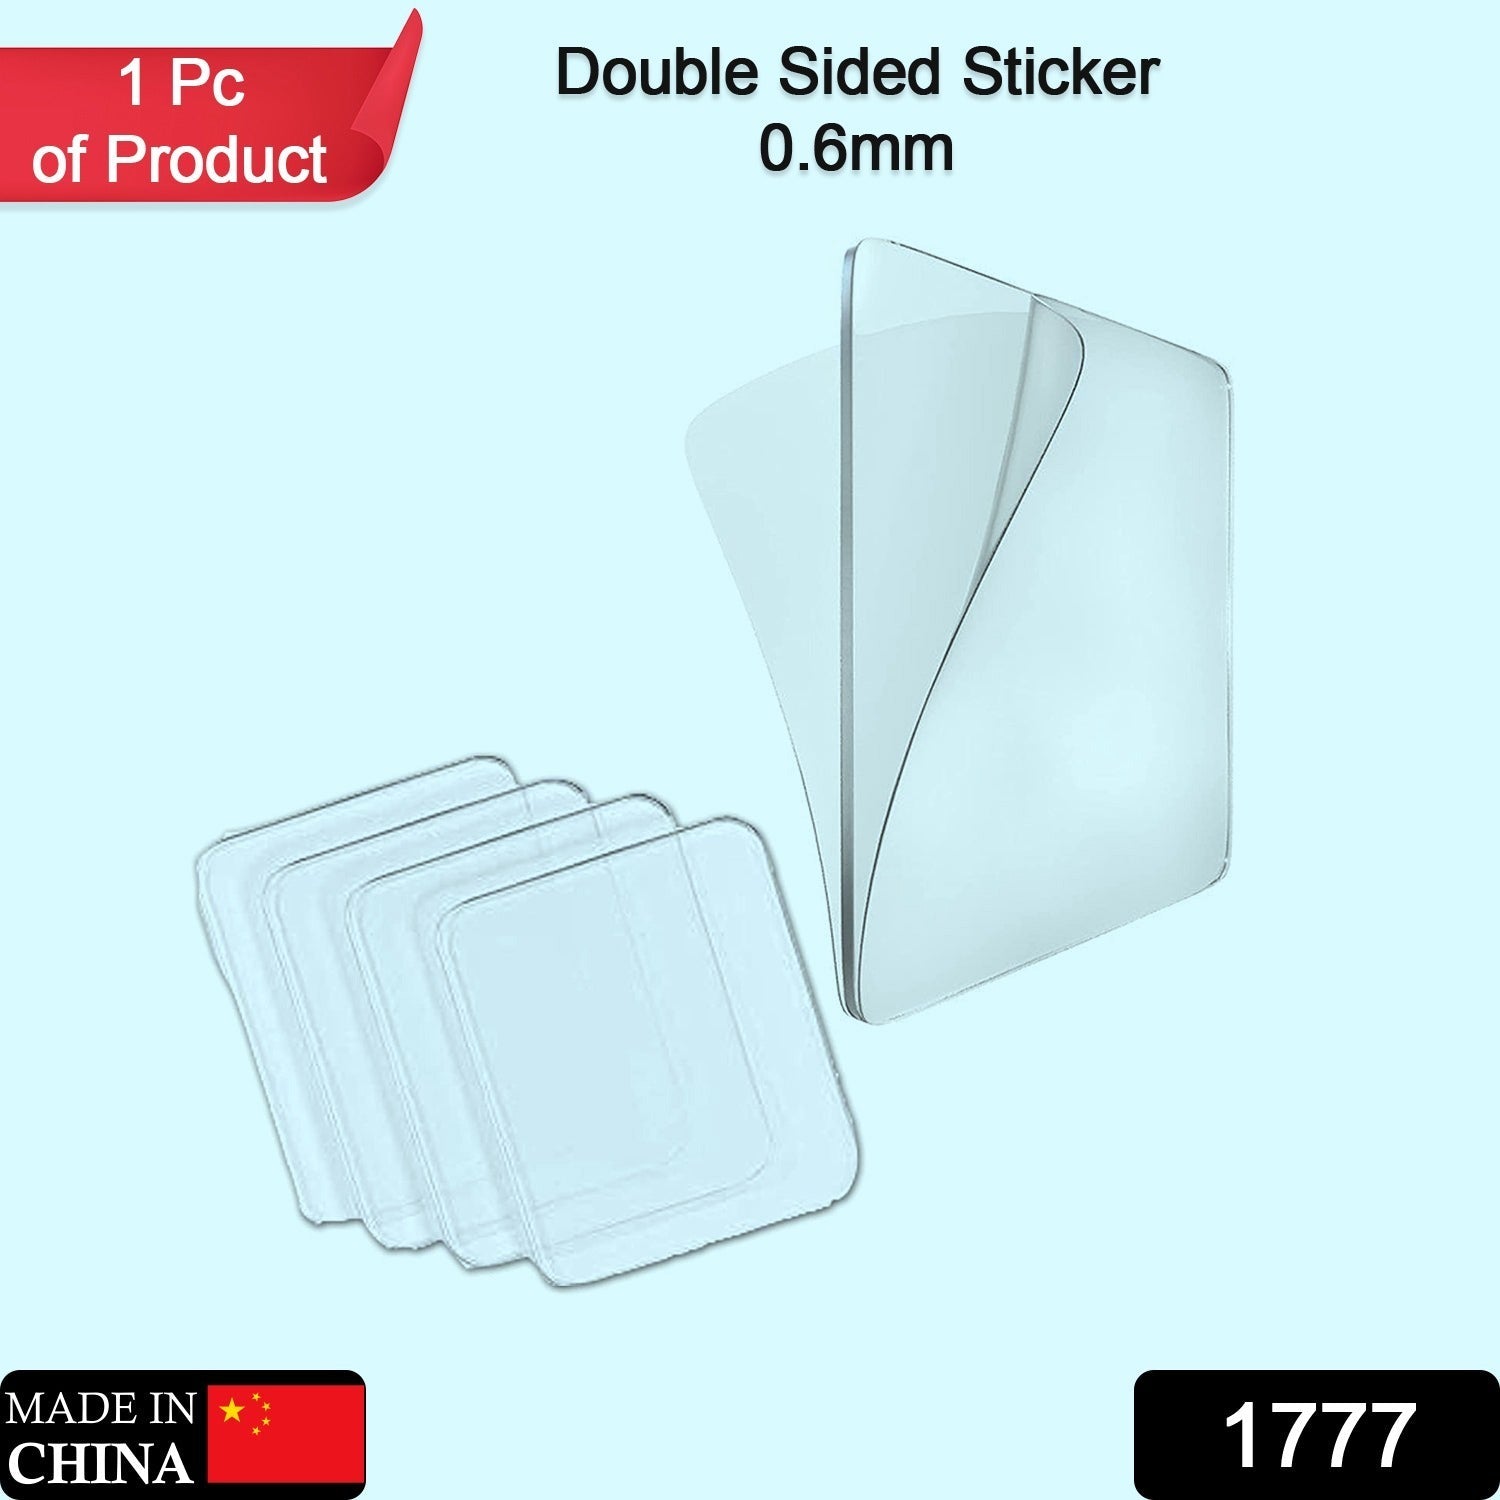 New Double Side Tape Sticker Strong Waterproof Wall Indoor Nano Adhesive No Trace Gel Clear Industrial Multipurpose Removable Use for Bedroom, Home, Kitchen, Hotel (0.6mmx1pc)